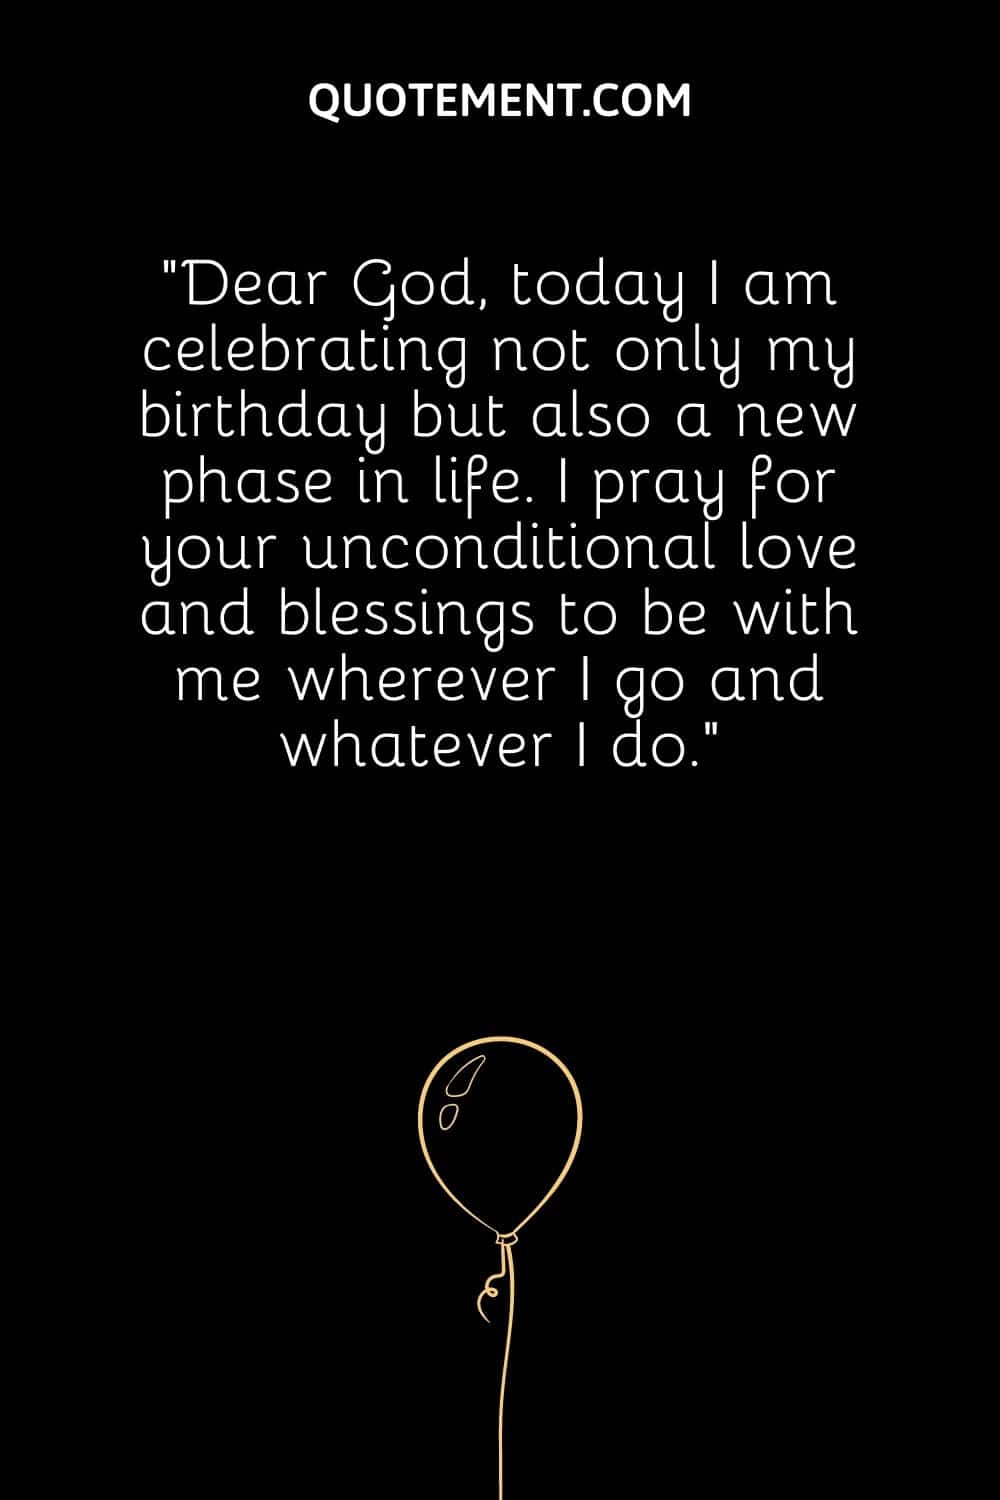 Dear God, today I am celebrating not only my birthday but also a new phase in life.